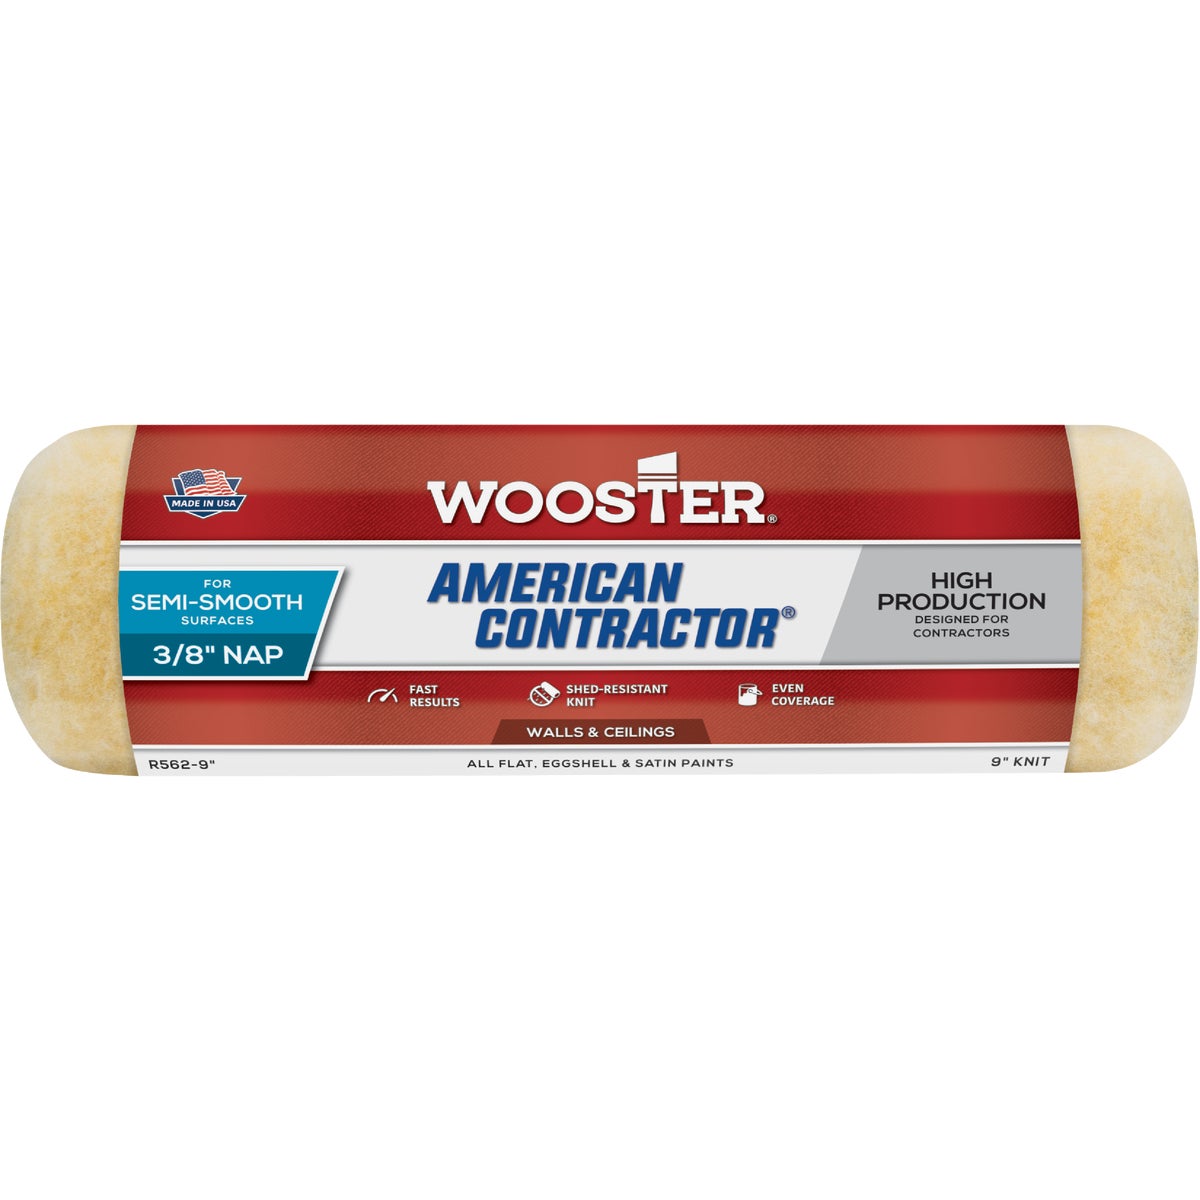 Wooster American Contractor 9 In. x 3/8 In. Knit Fabric Roller Cover